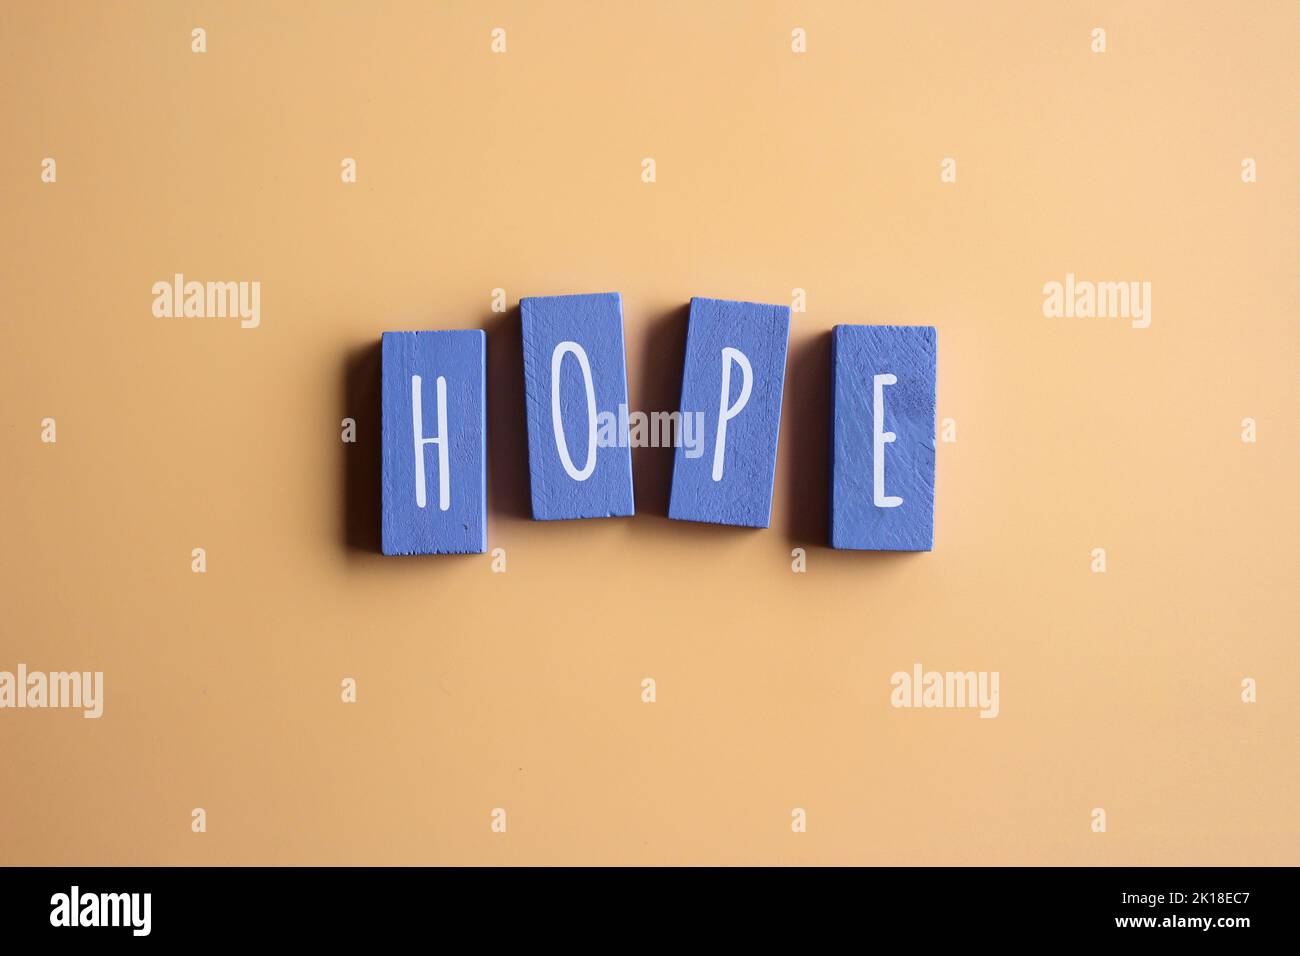 Top view image of wooden cubes with text HOPE Stock Photo